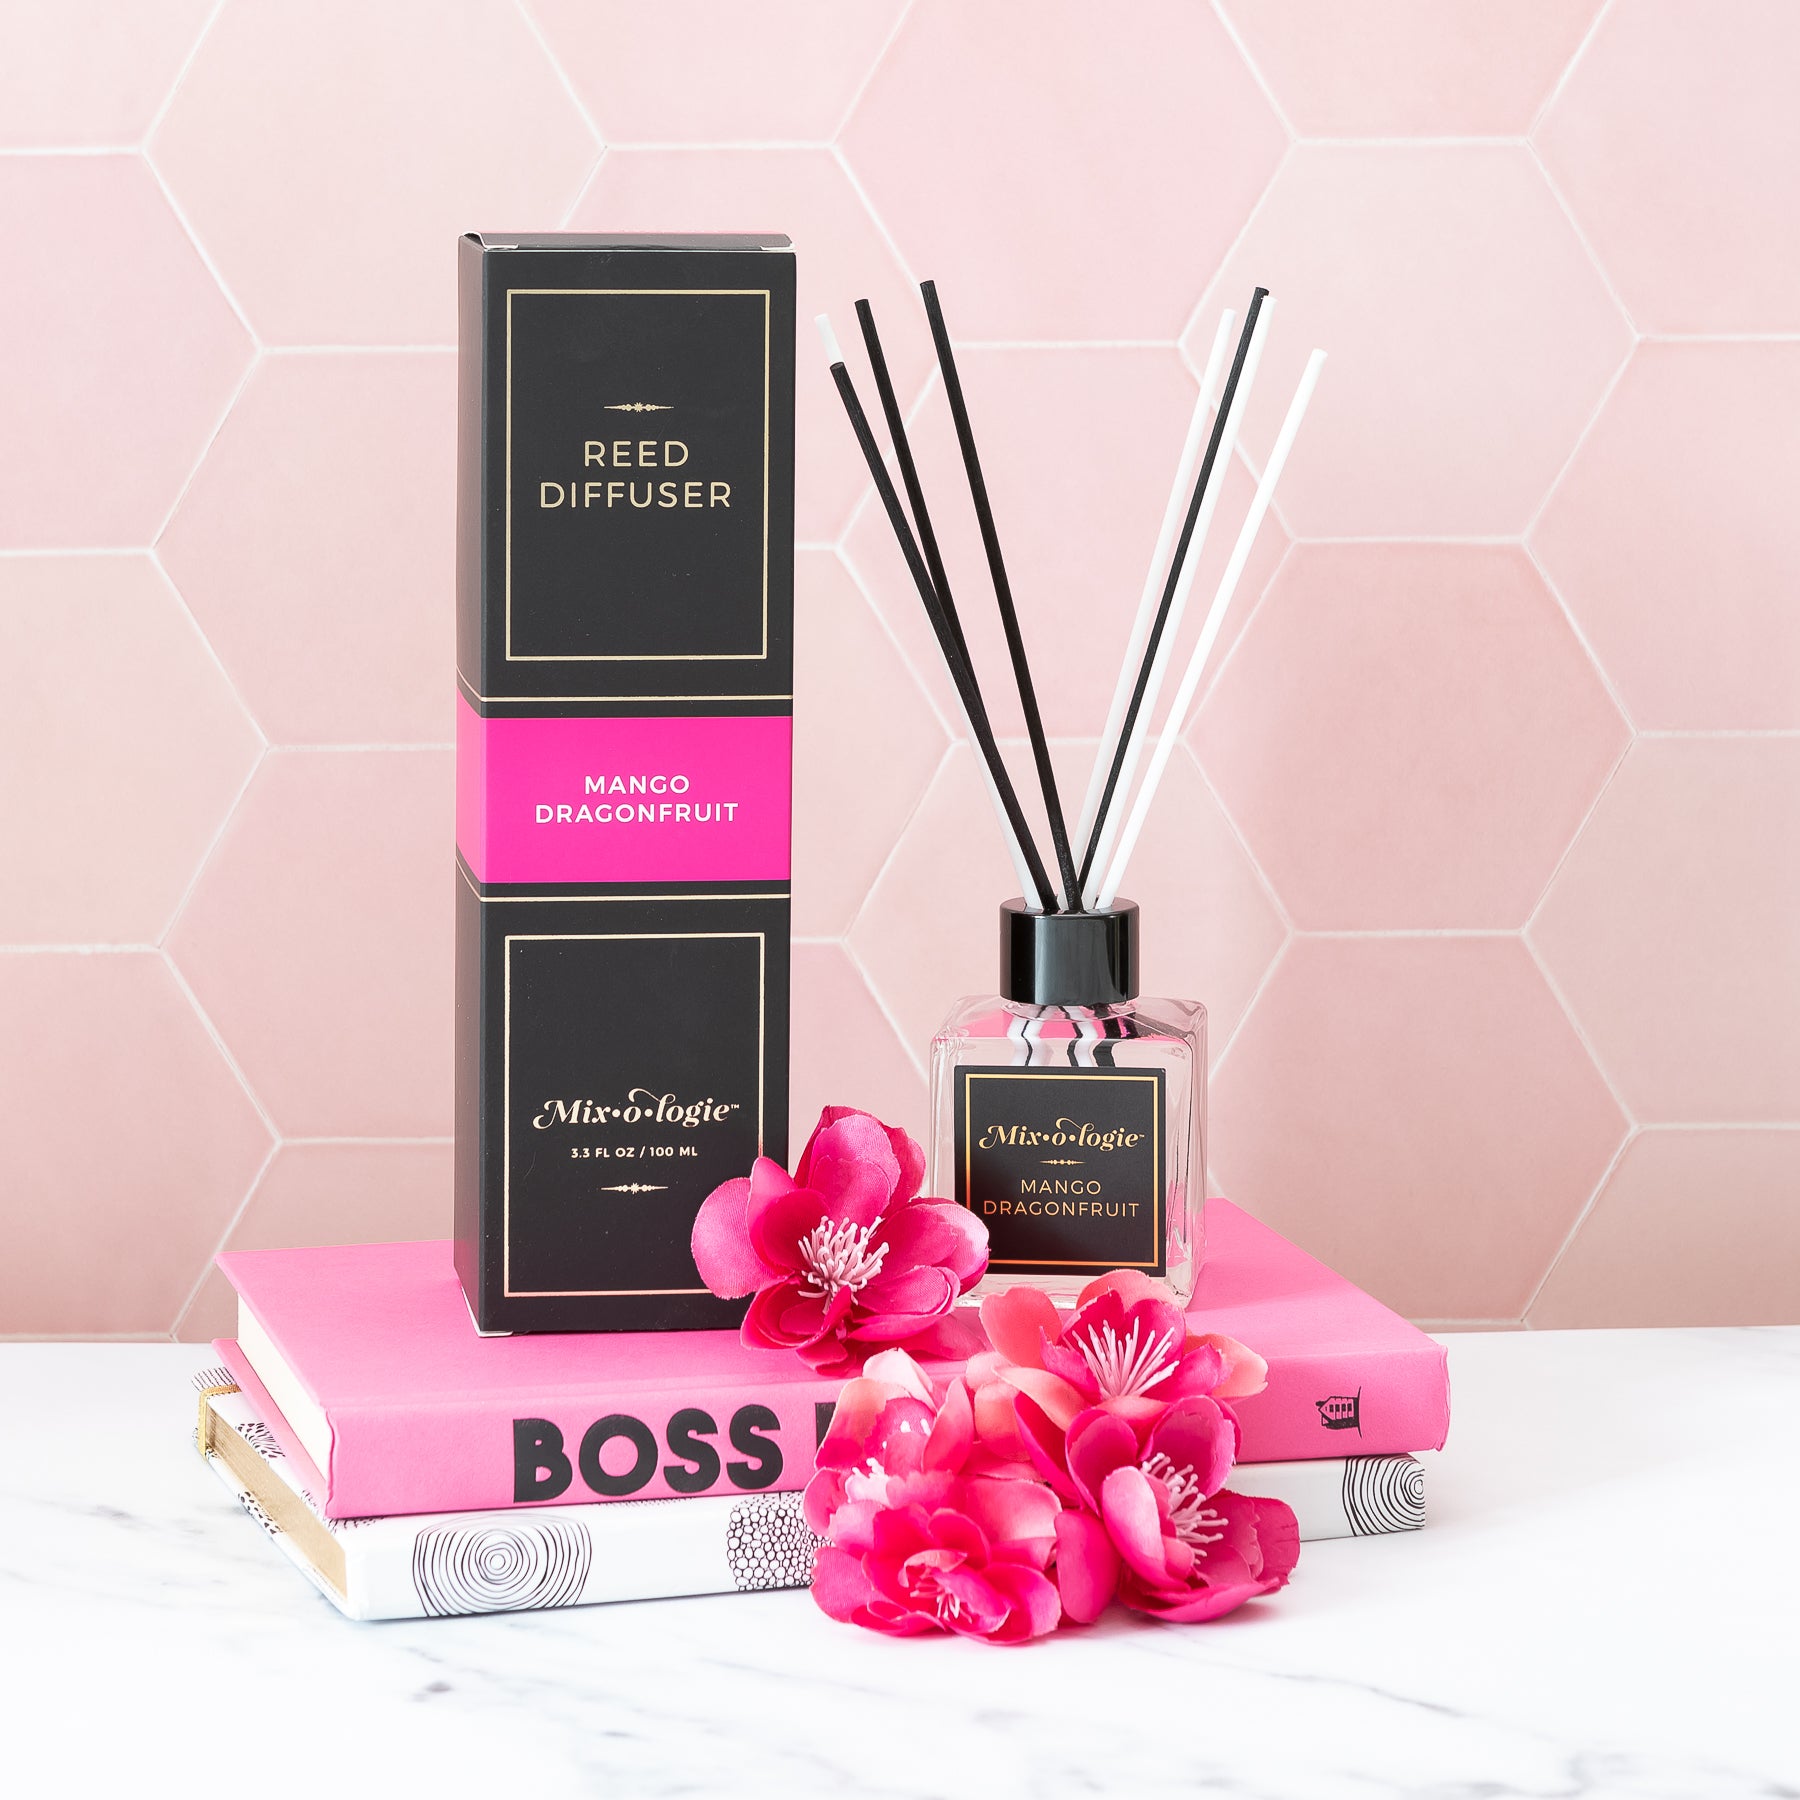 Mango Dragonfruit Reed Diffuser is a clear square glass container with black label that says Mixologie – Mango Dragonfruit. Has a black top and 4 white & 4 black reed sticks coming out of top, is 3.3 fl oz or 100 mL of clear scented liquid. Black rectangle package box with bright pink label. Box and diffuser are pictured pink tile background, books, and pink flowers.